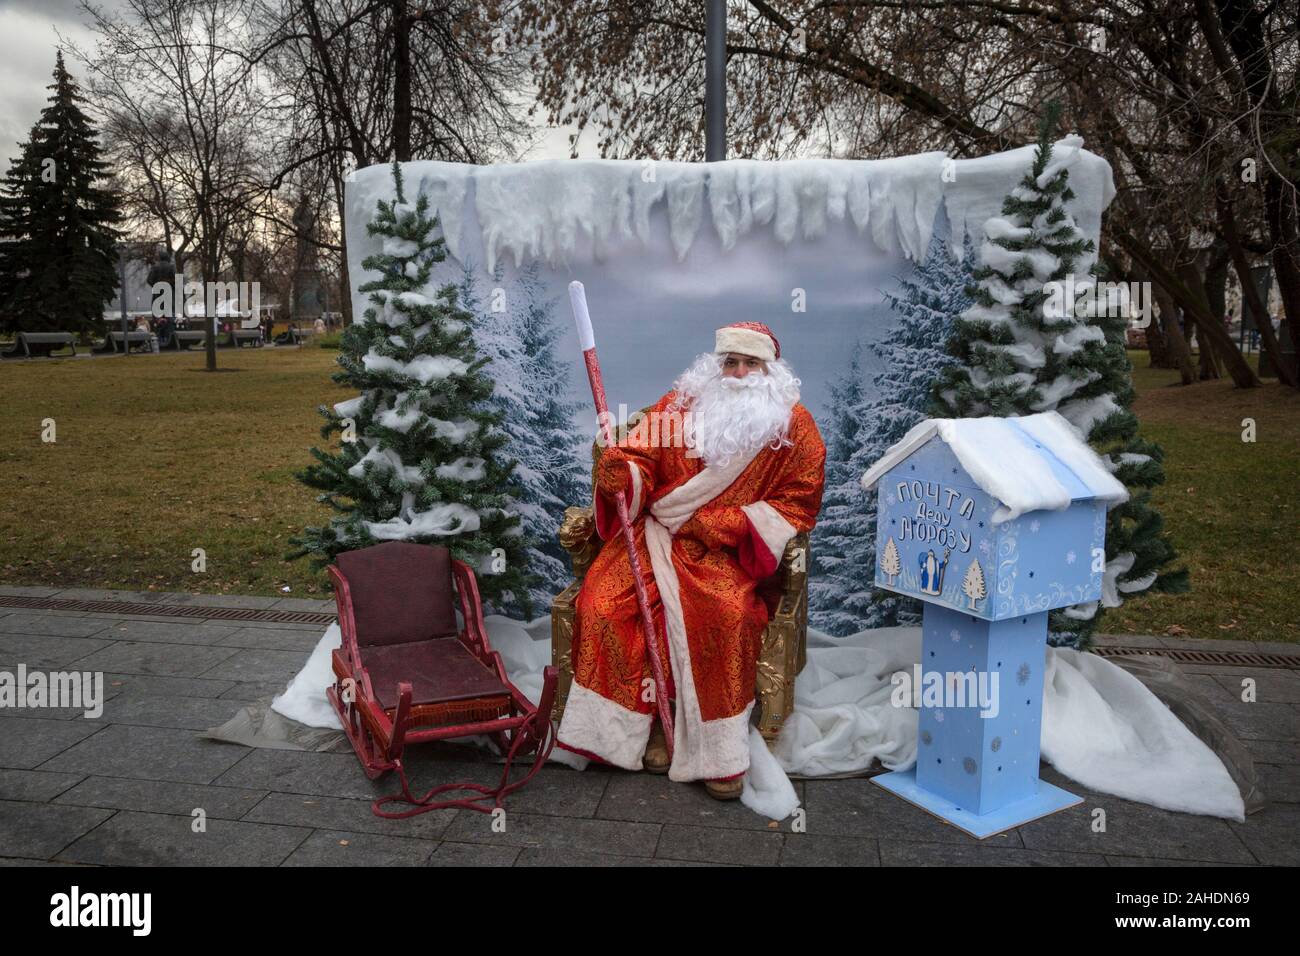 Ded Moroz (Russian Santa Claus) in winter scenery sits on a chair in one of the parks of Moscow during abnormal warm and snowless winter, Russia Stock Photo